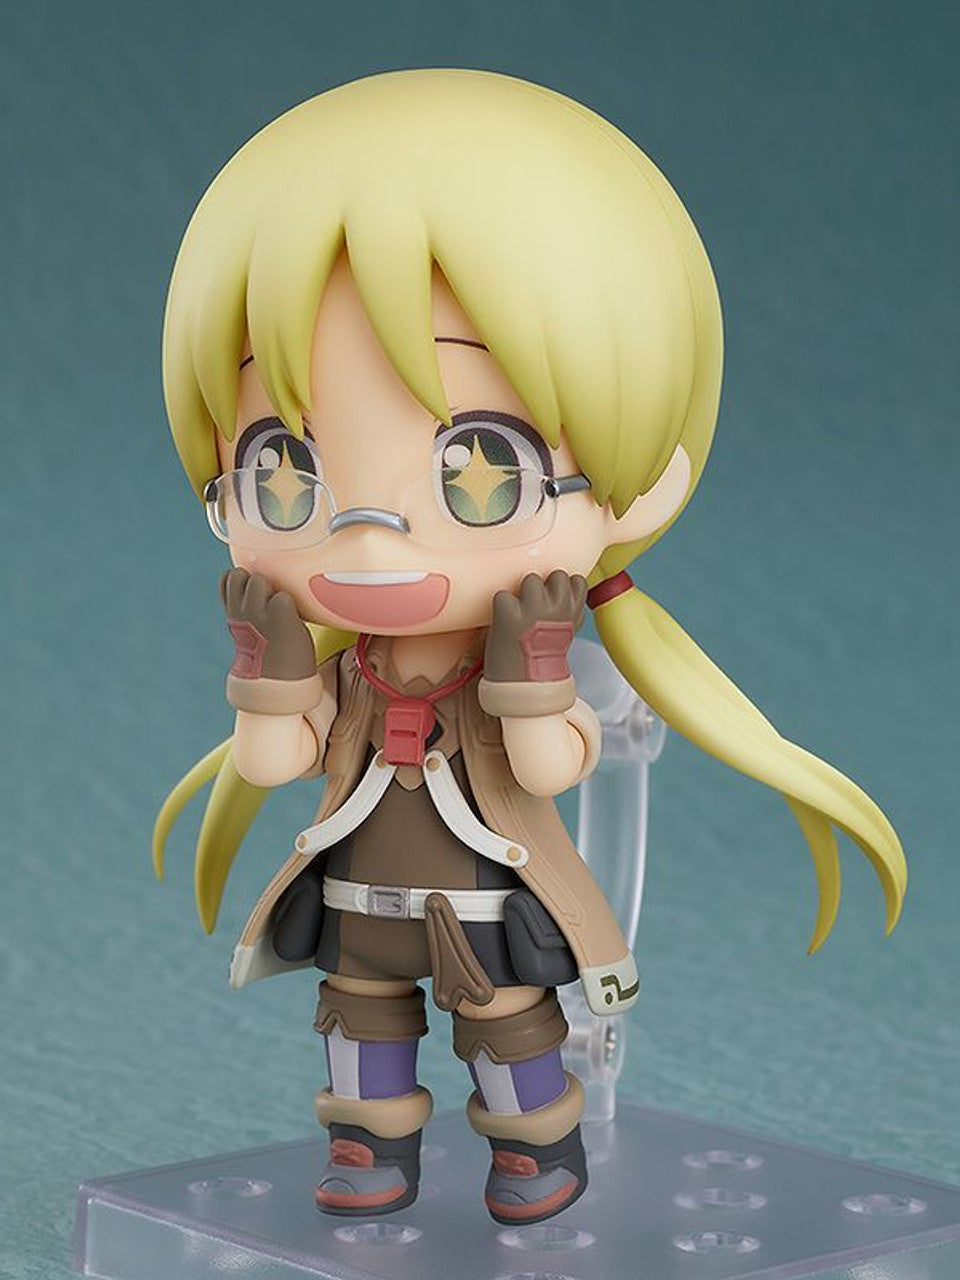 Made in Abyss Nendoroid [1054] Riko (re-run)-Good Smile Company-Ace Cards &amp; Collectibles